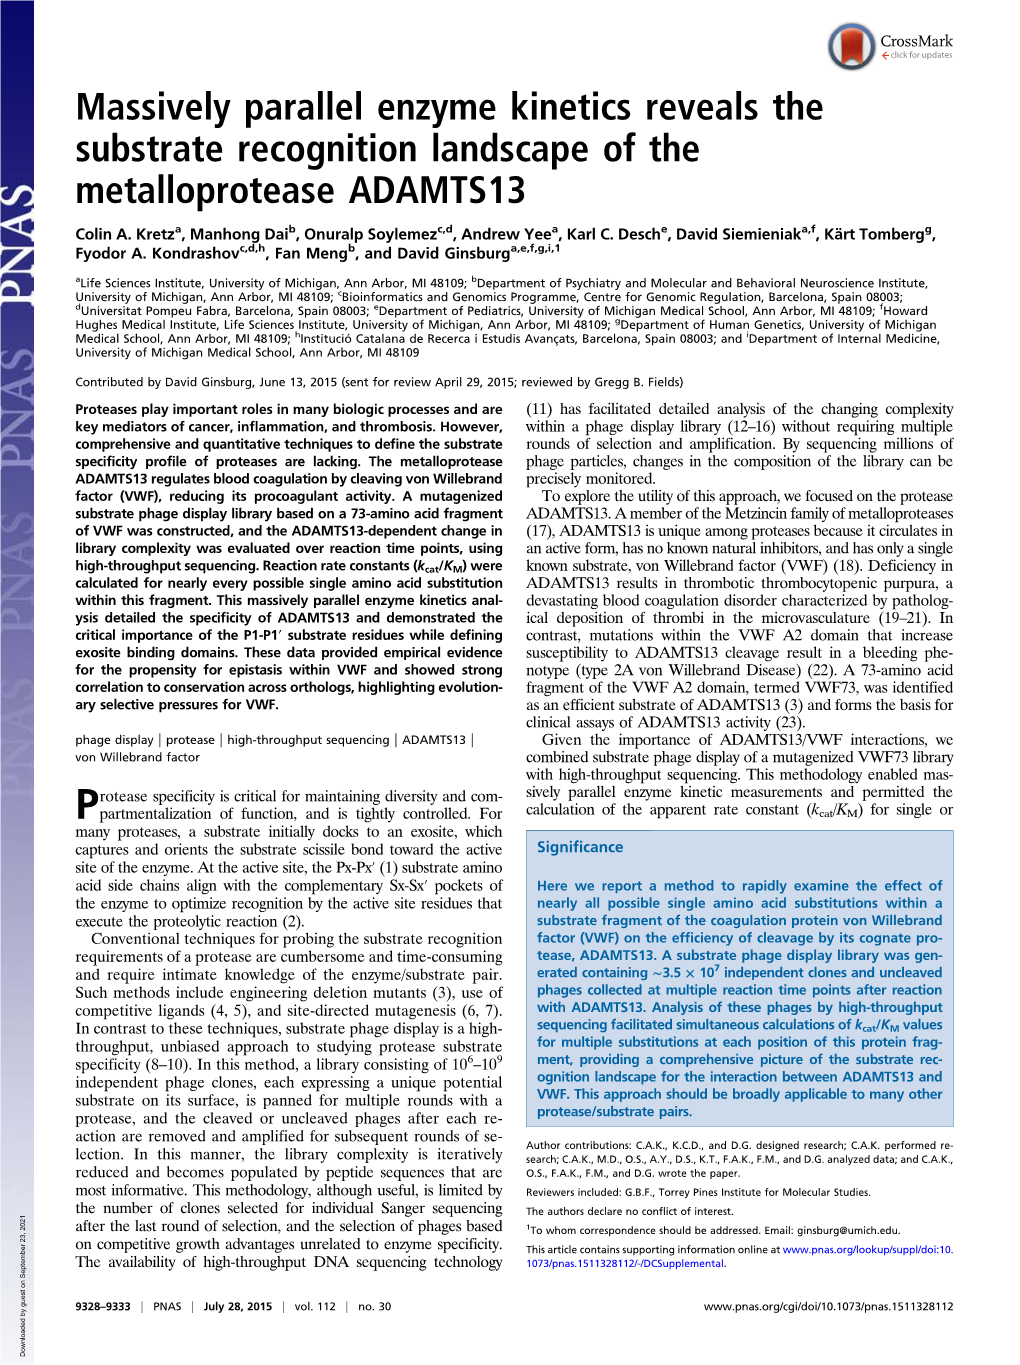 Massively Parallel Enzyme Kinetics Reveals the Substrate Recognition Landscape of the Metalloprotease ADAMTS13